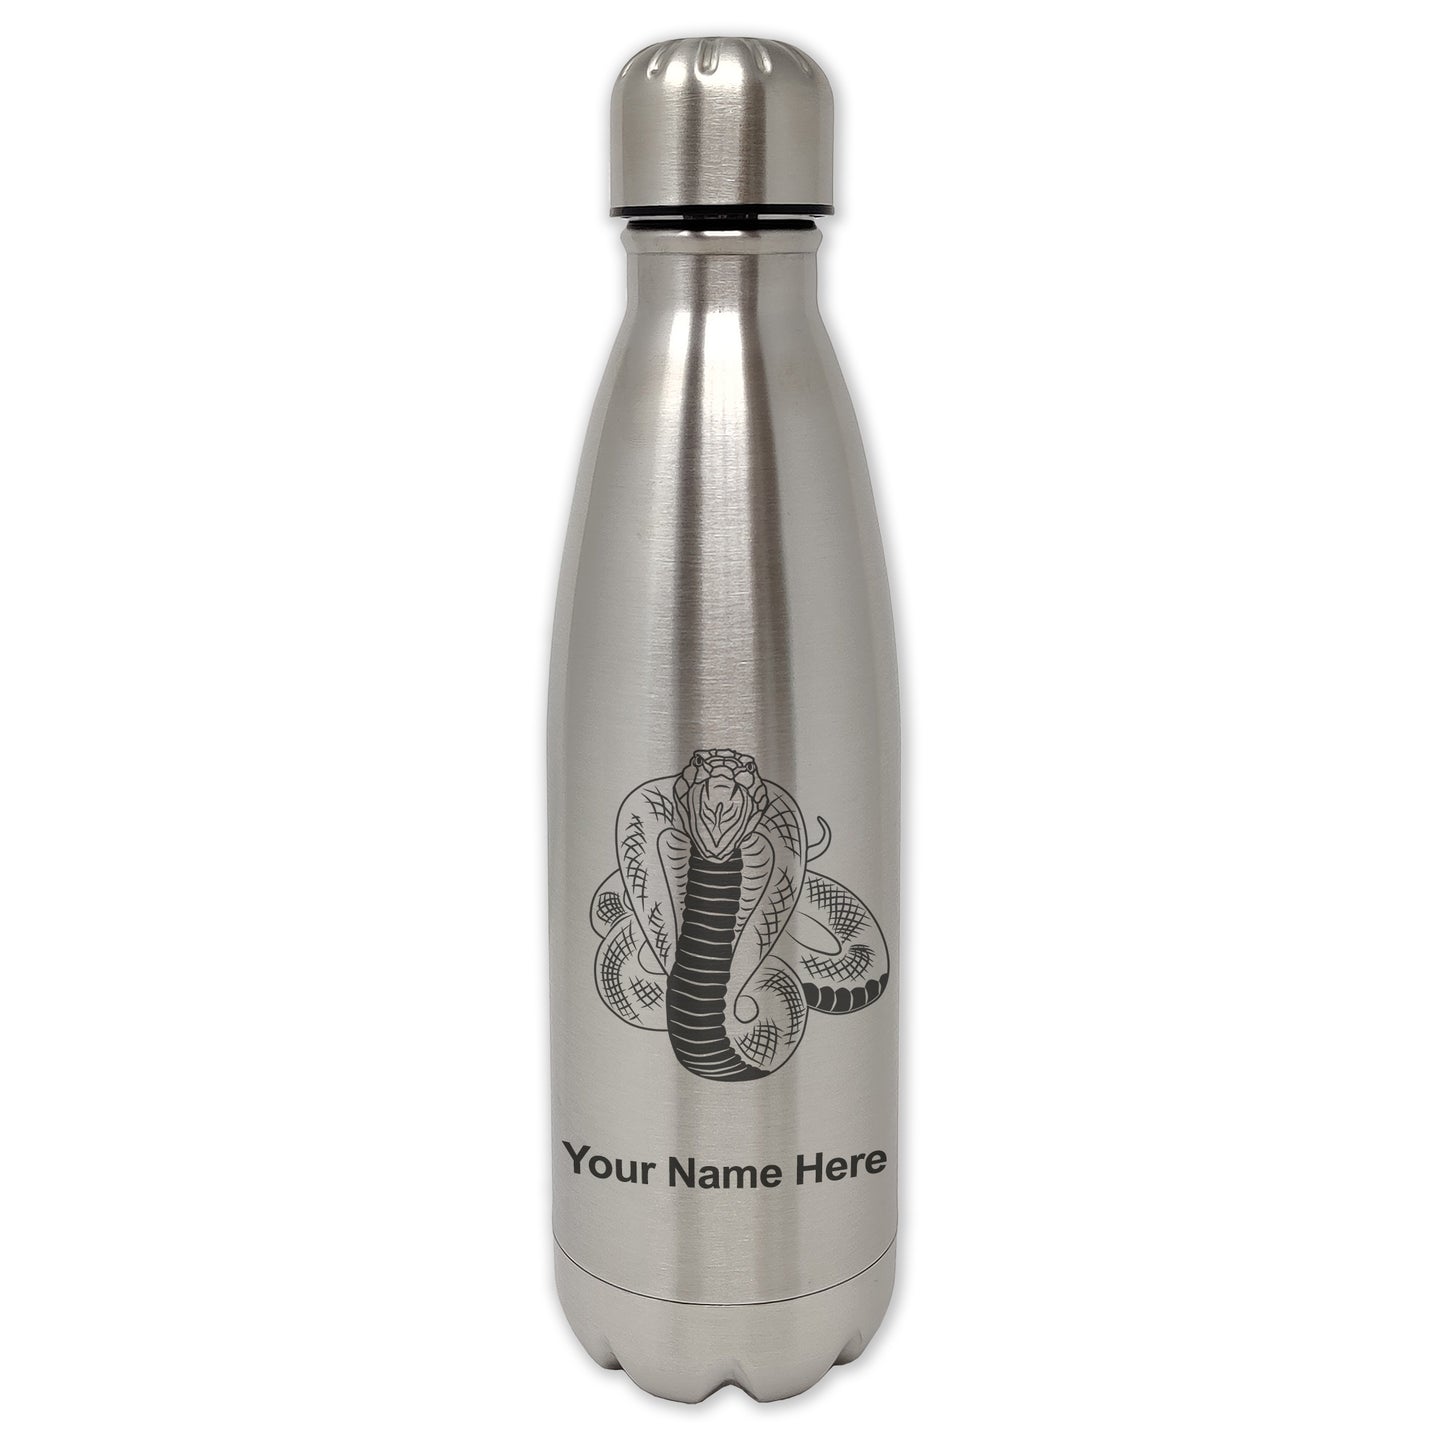 LaserGram Single Wall Water Bottle, Cobra Snake, Personalized Engraving Included